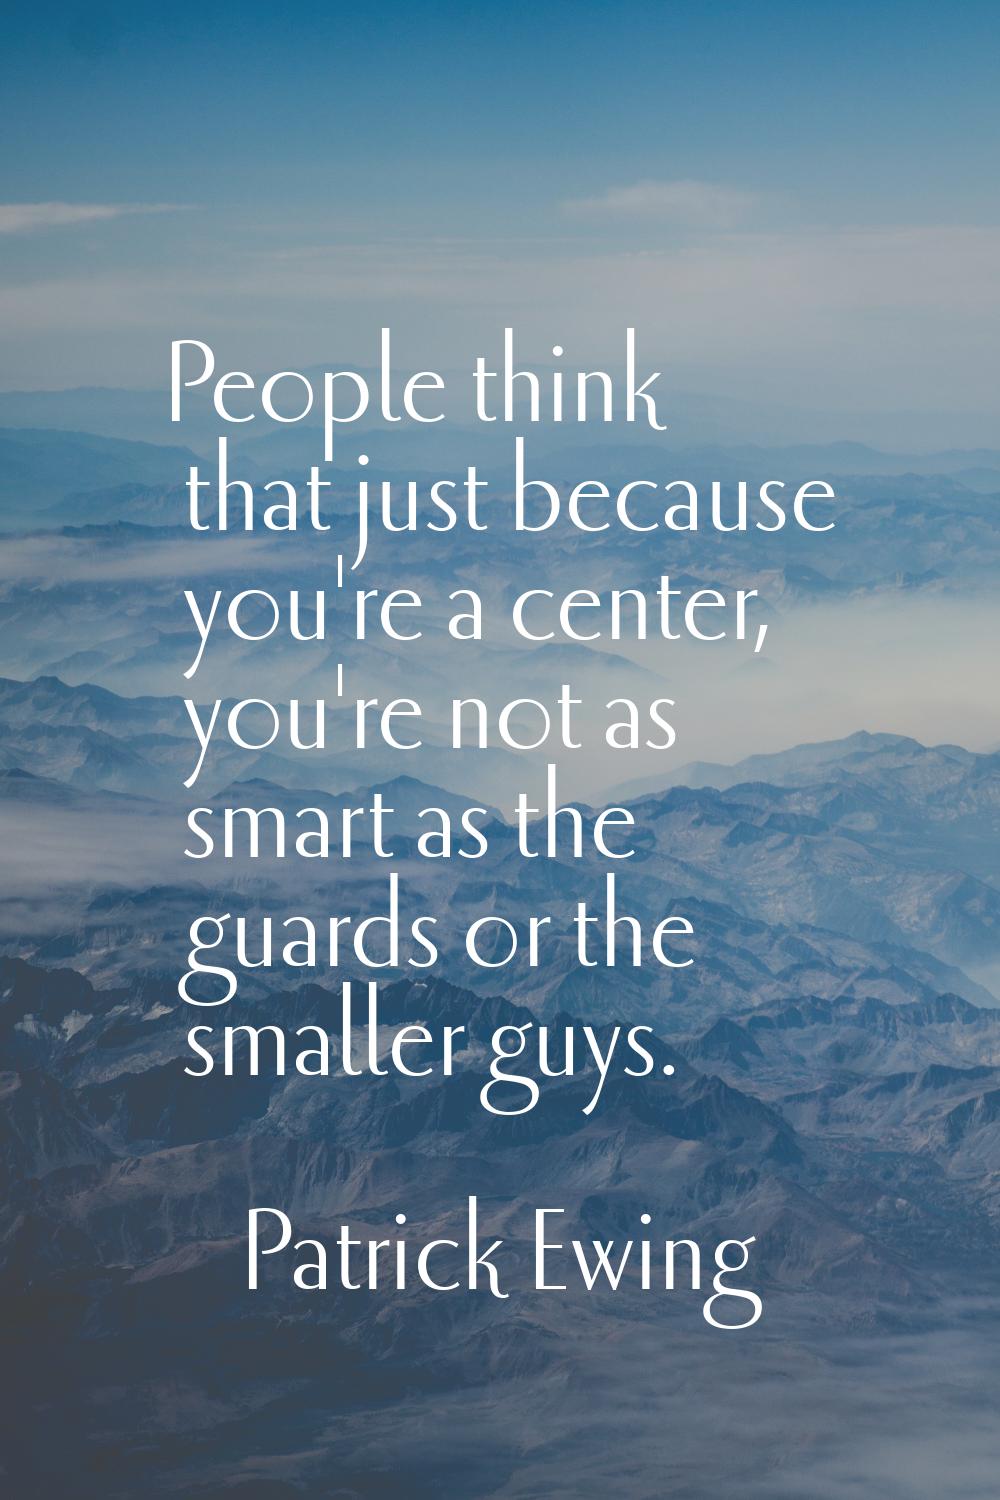 People think that just because you're a center, you're not as smart as the guards or the smaller gu